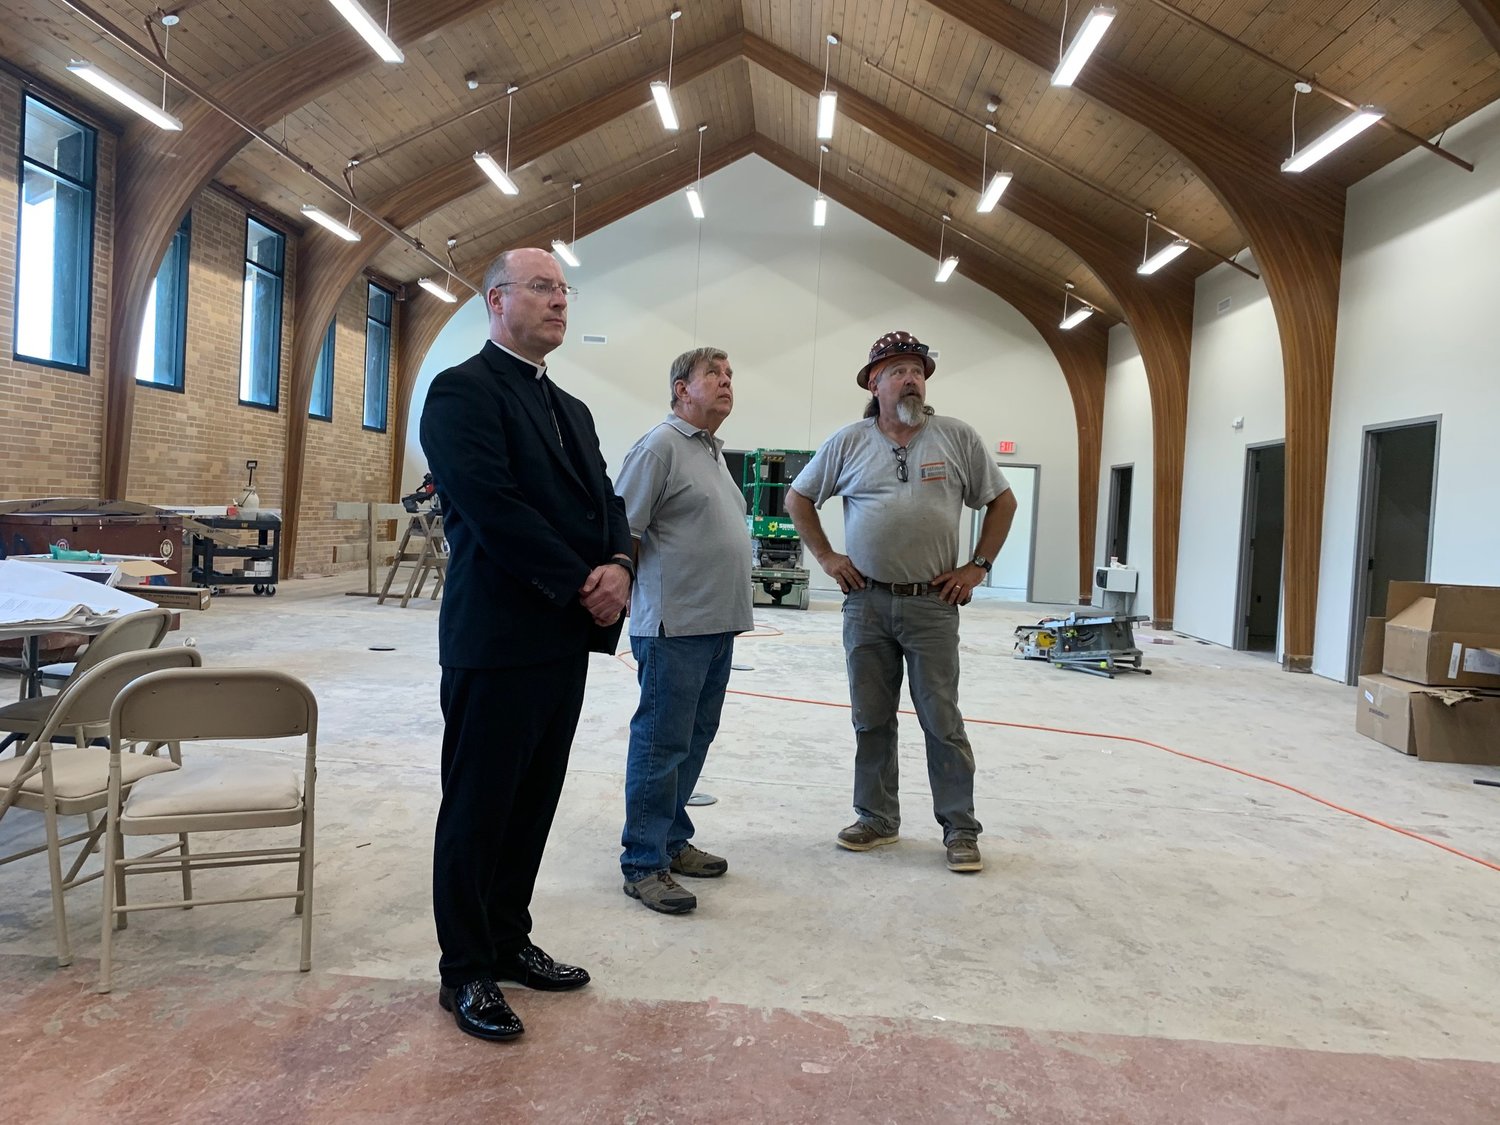 Bishop McKnight, CCCNMO Board Member Jim Wisch, and a construction worker survey the large open room in the middle of the new center.